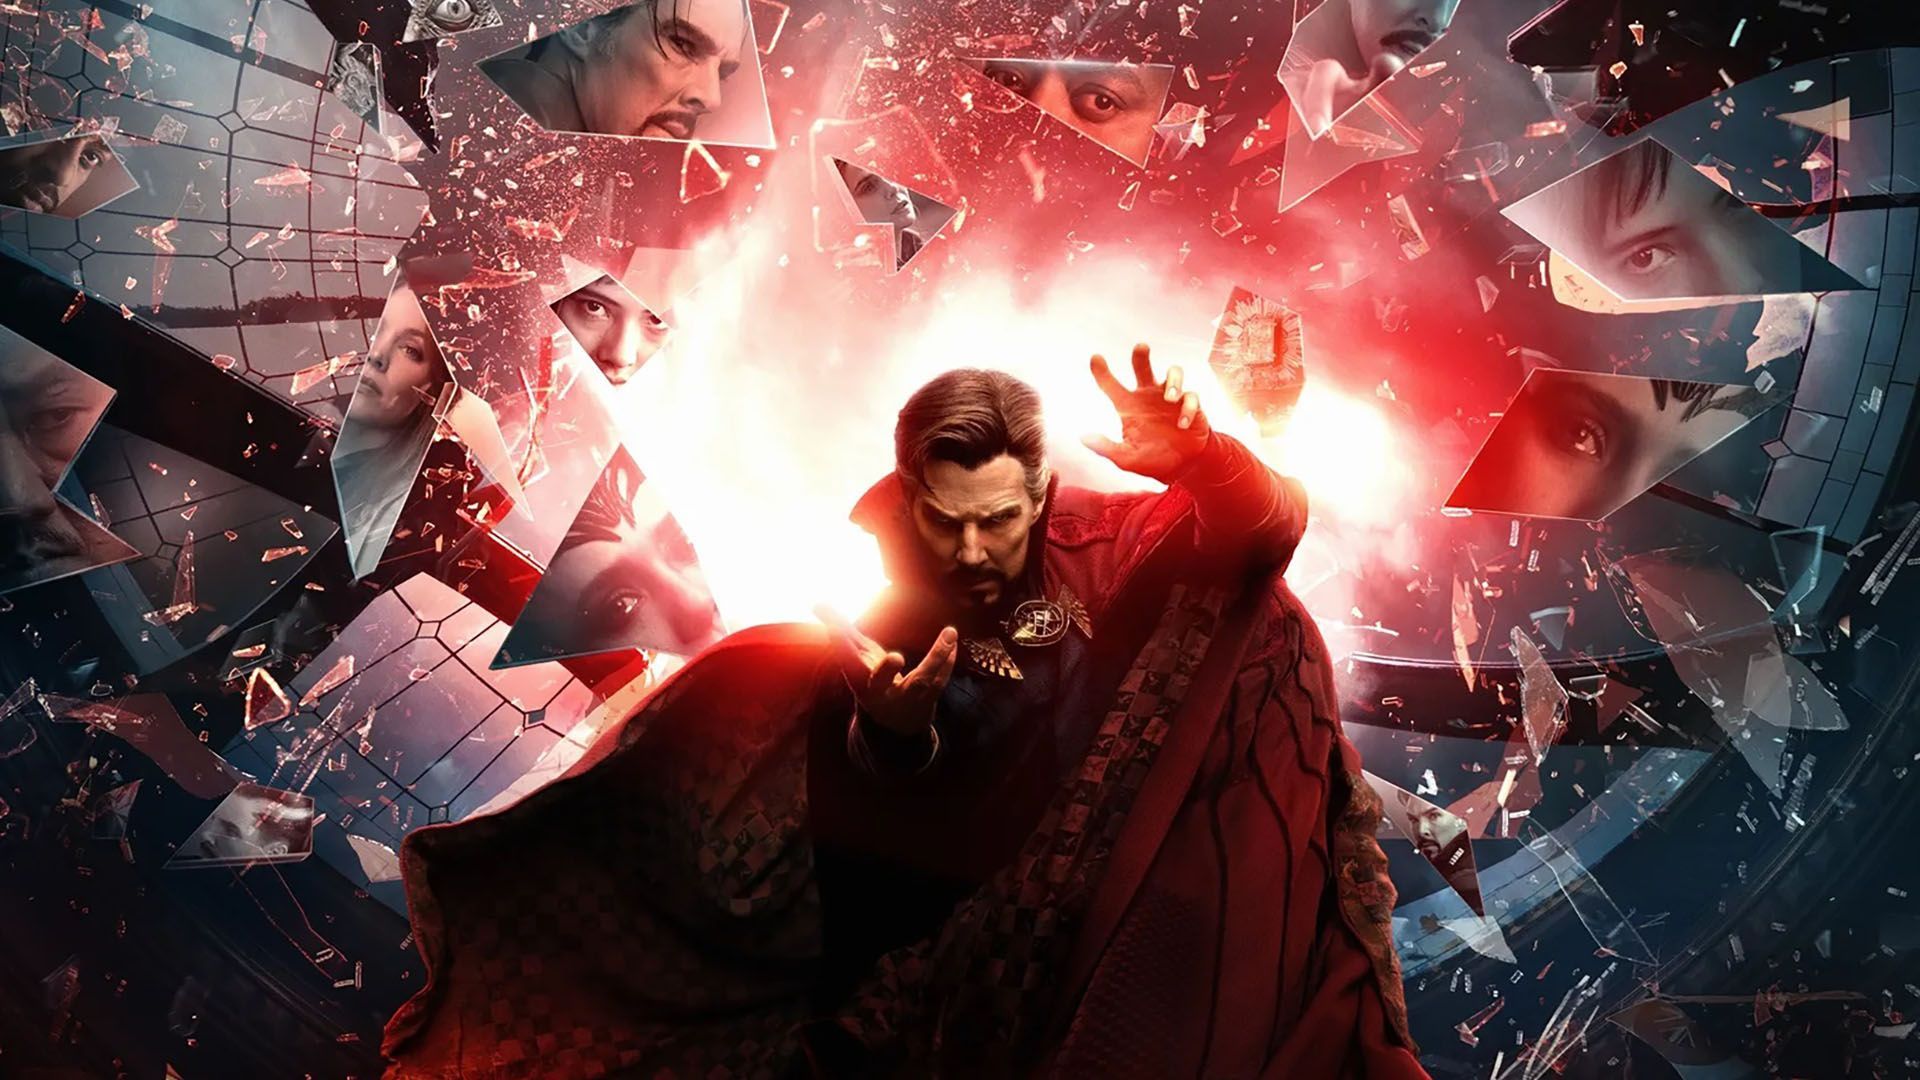 Concours / Doctor Strange in the Multiverse of Madness en salle le 4 mai